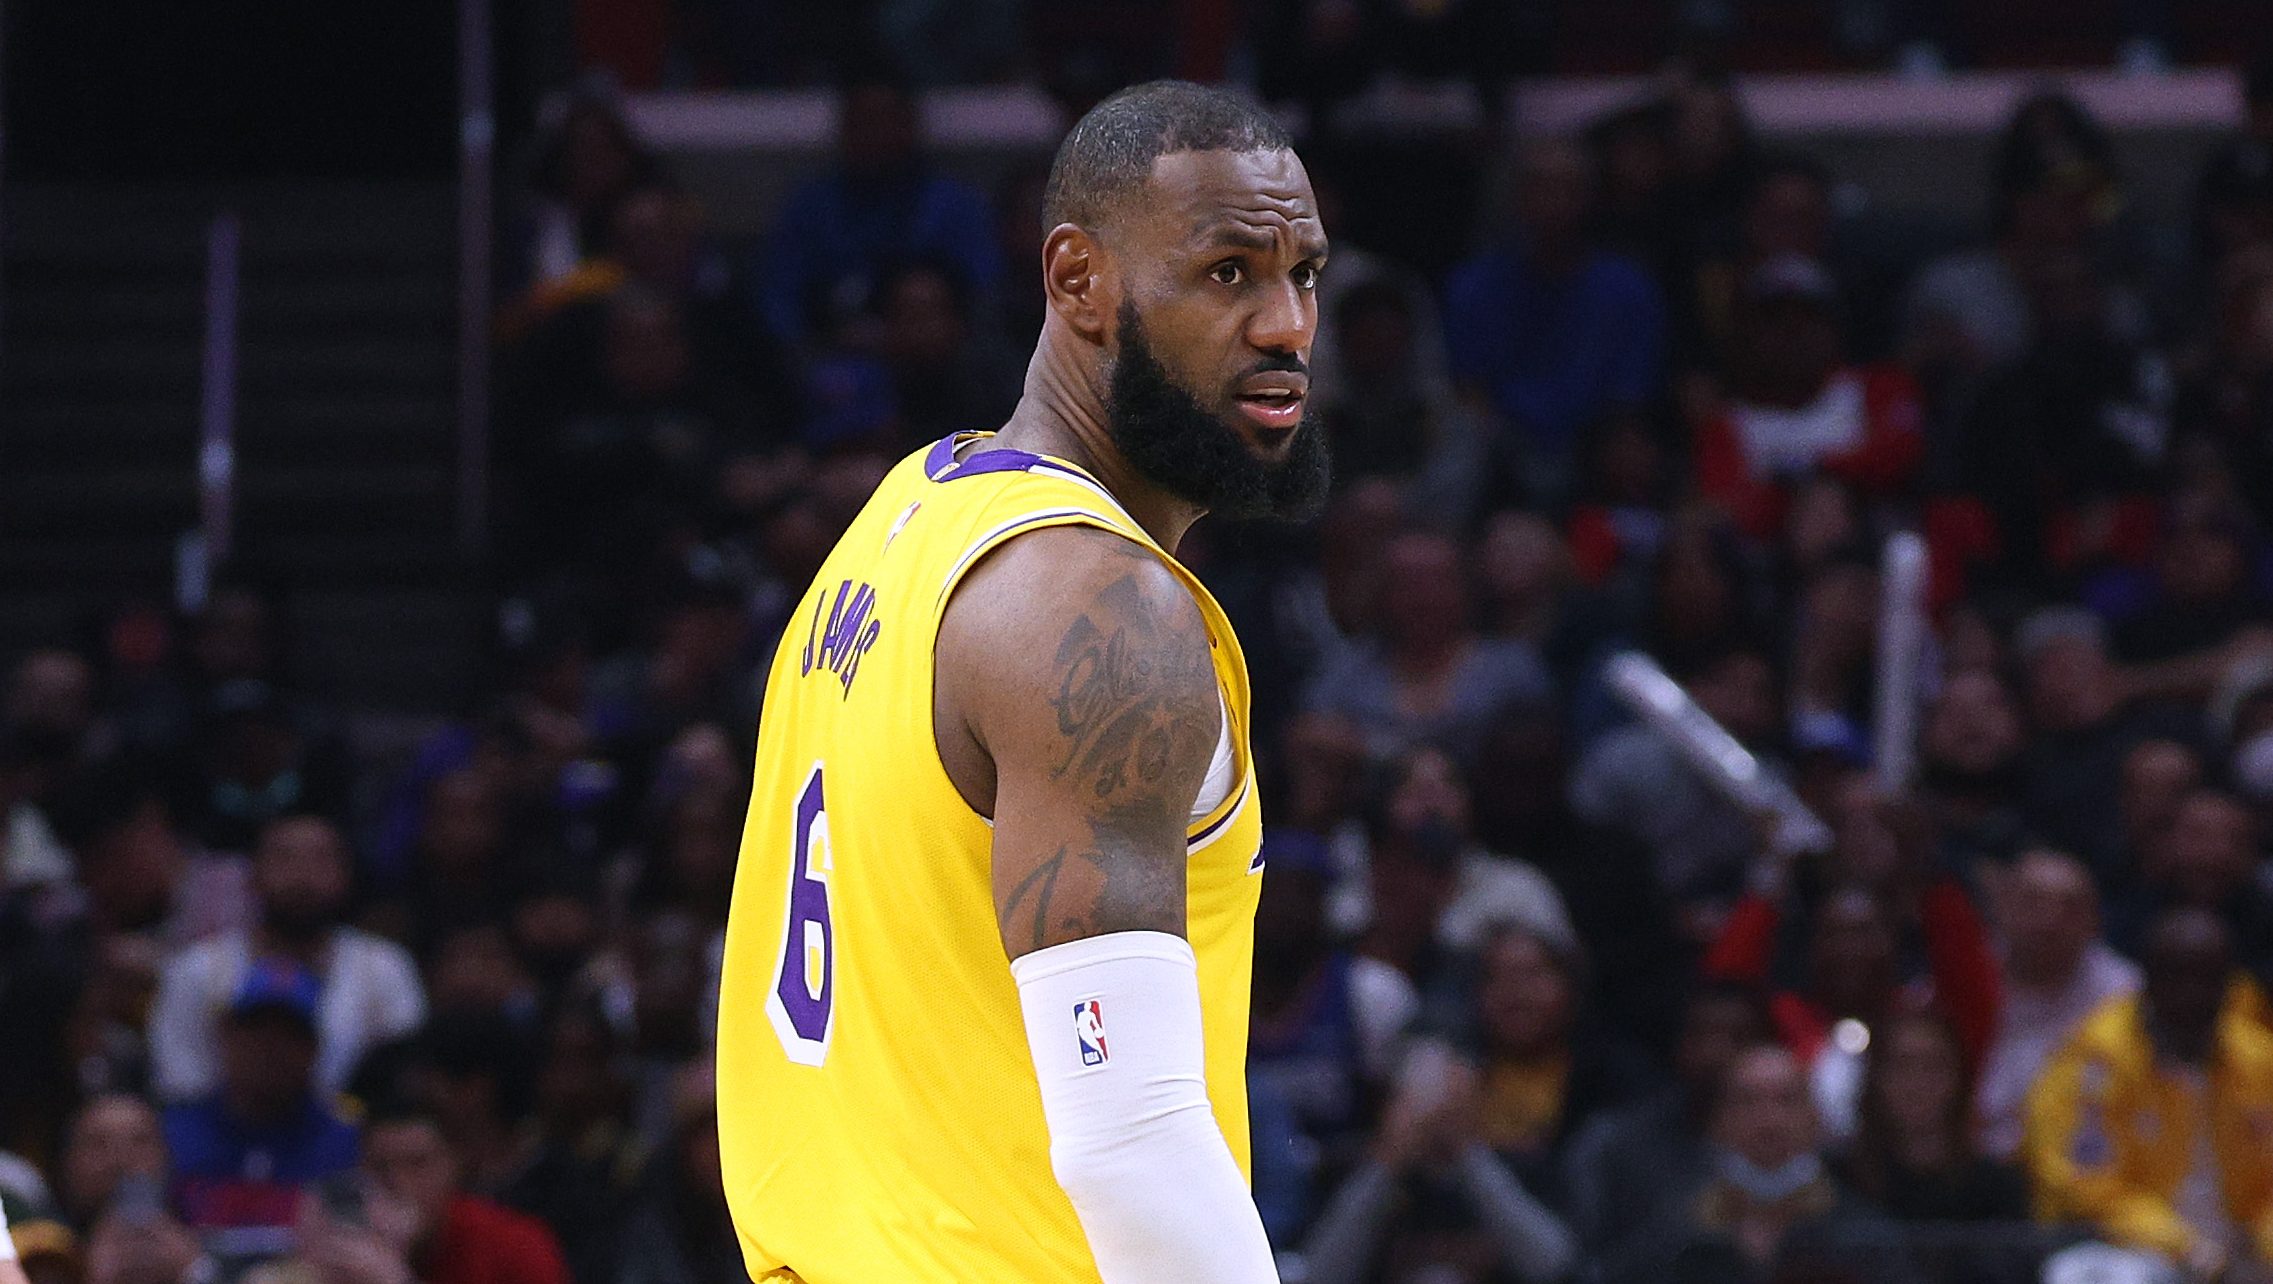 Lakers' Dennis Schroder rips referees after LeBron James' missed foul call  